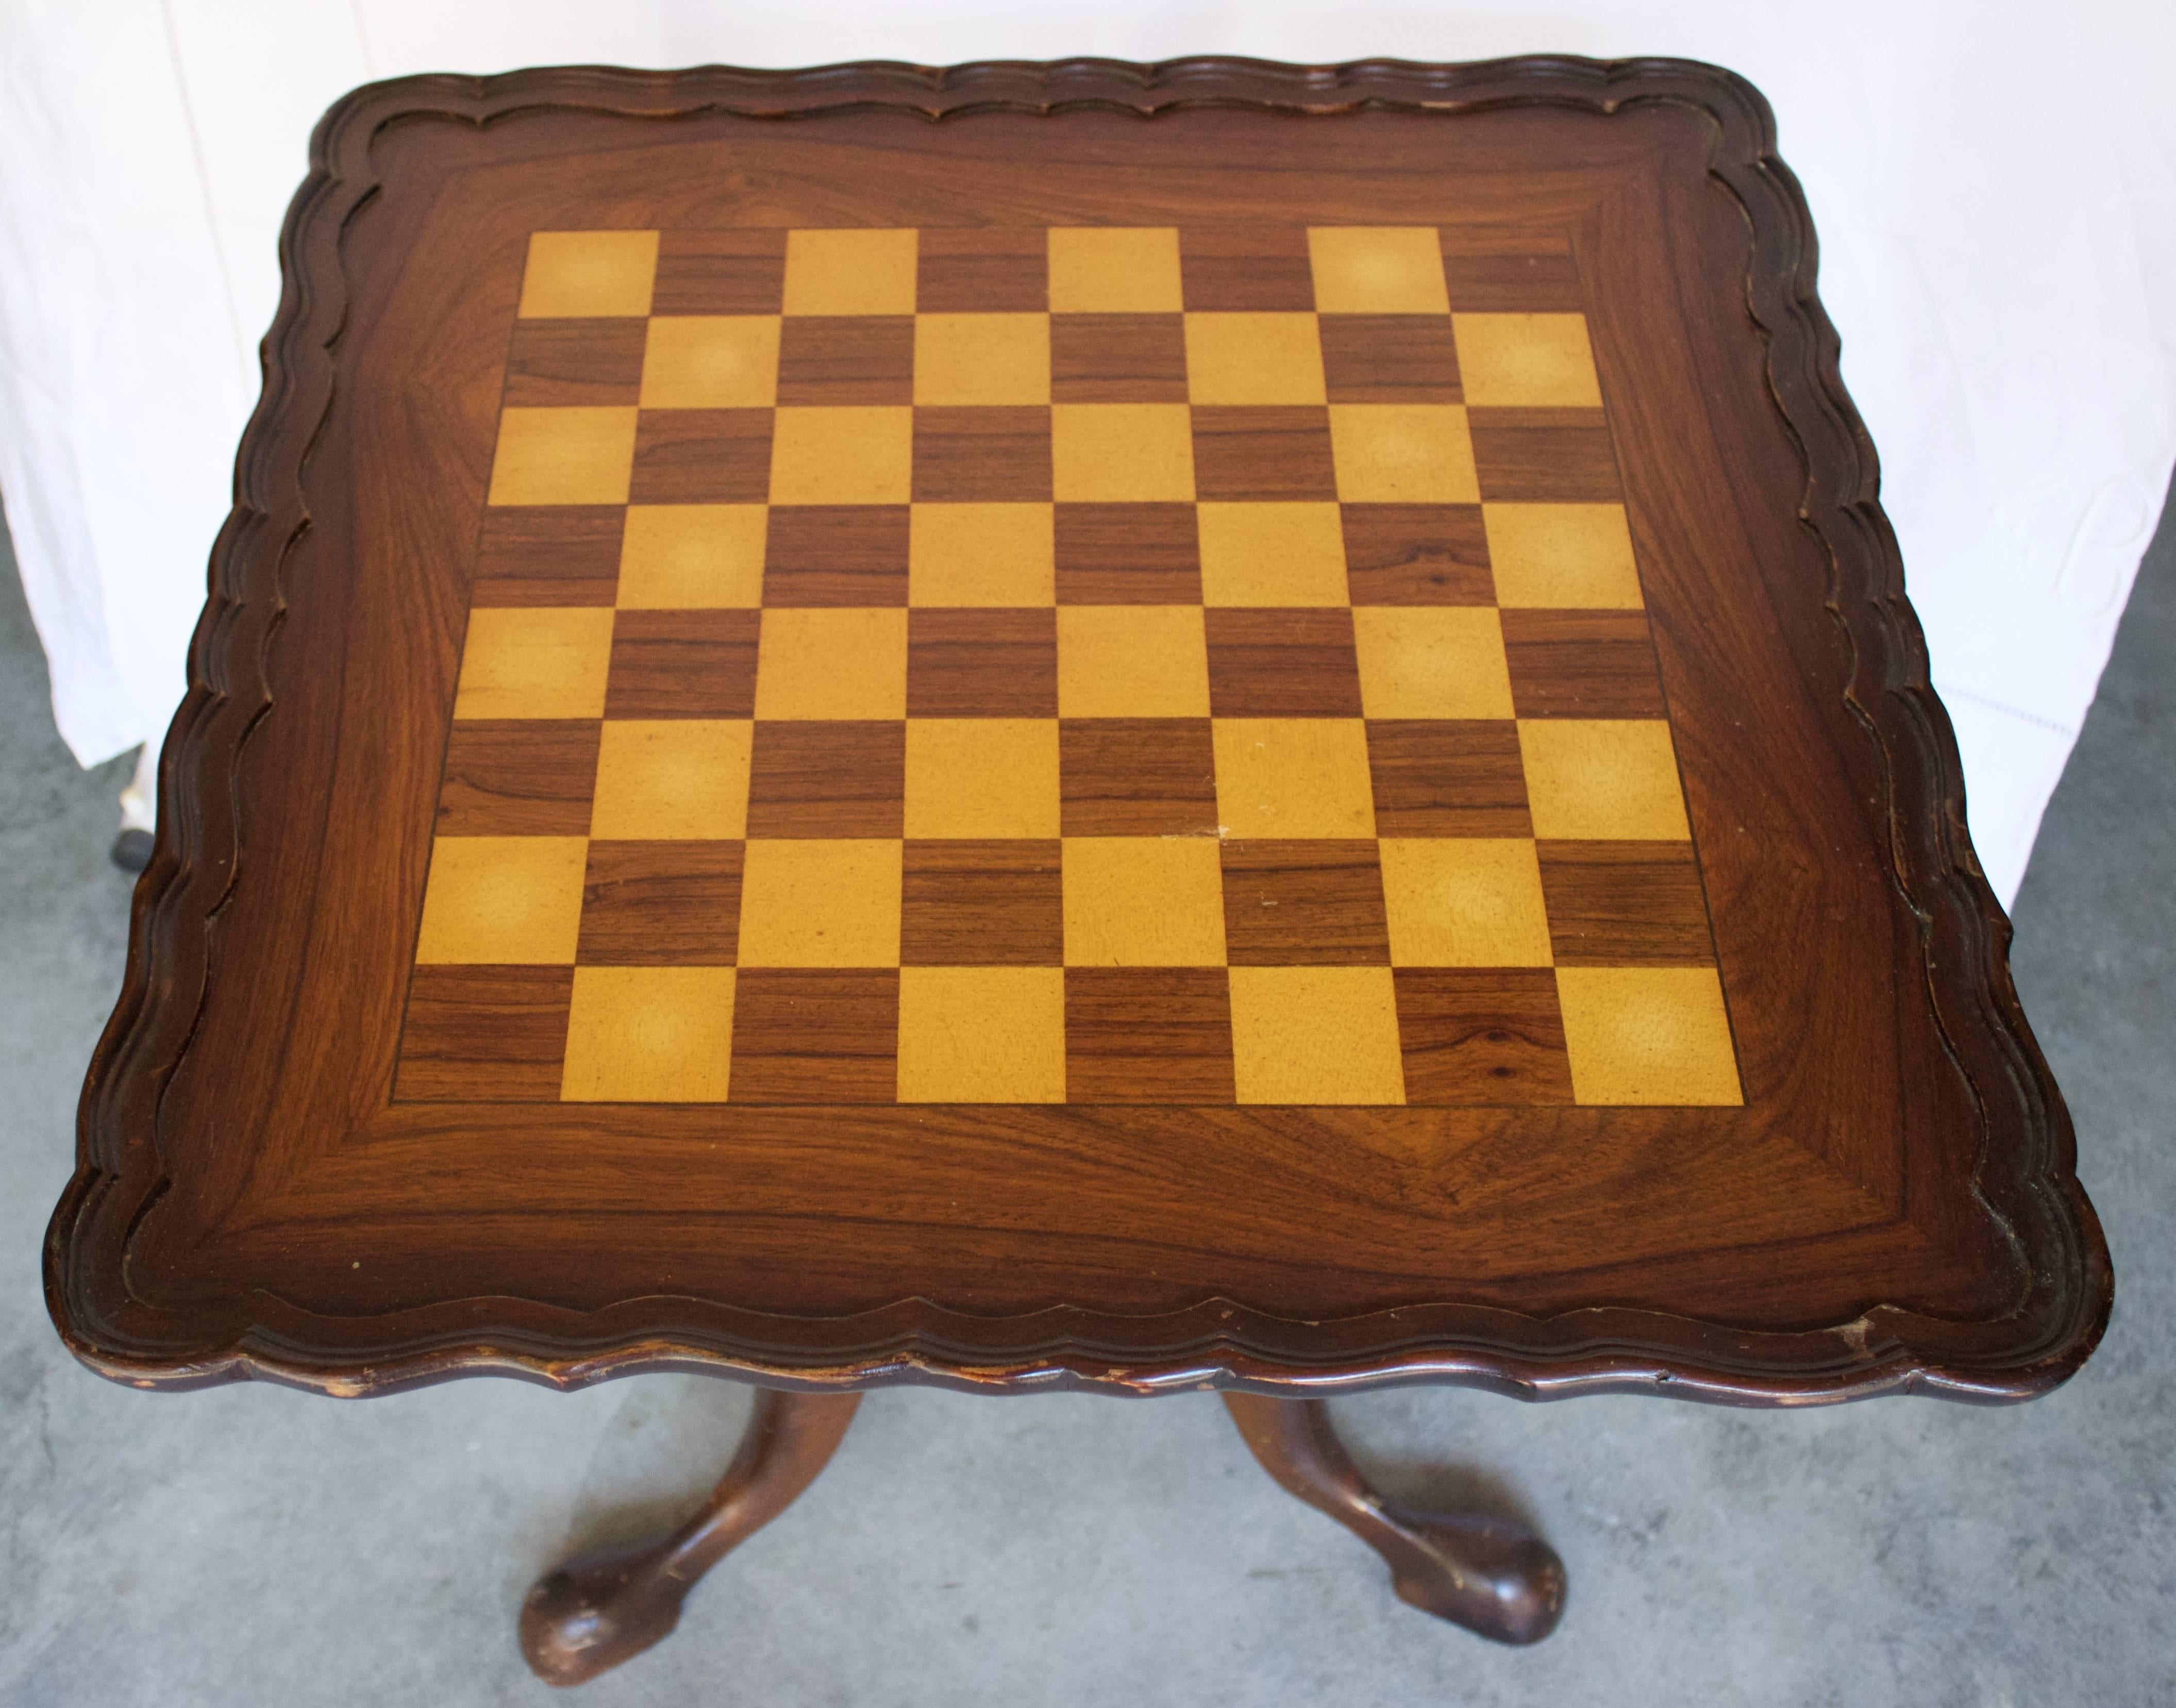 
Good size table you can comfortably play from an armchair. Solid walnut with a maple inlaid top featuring a 16